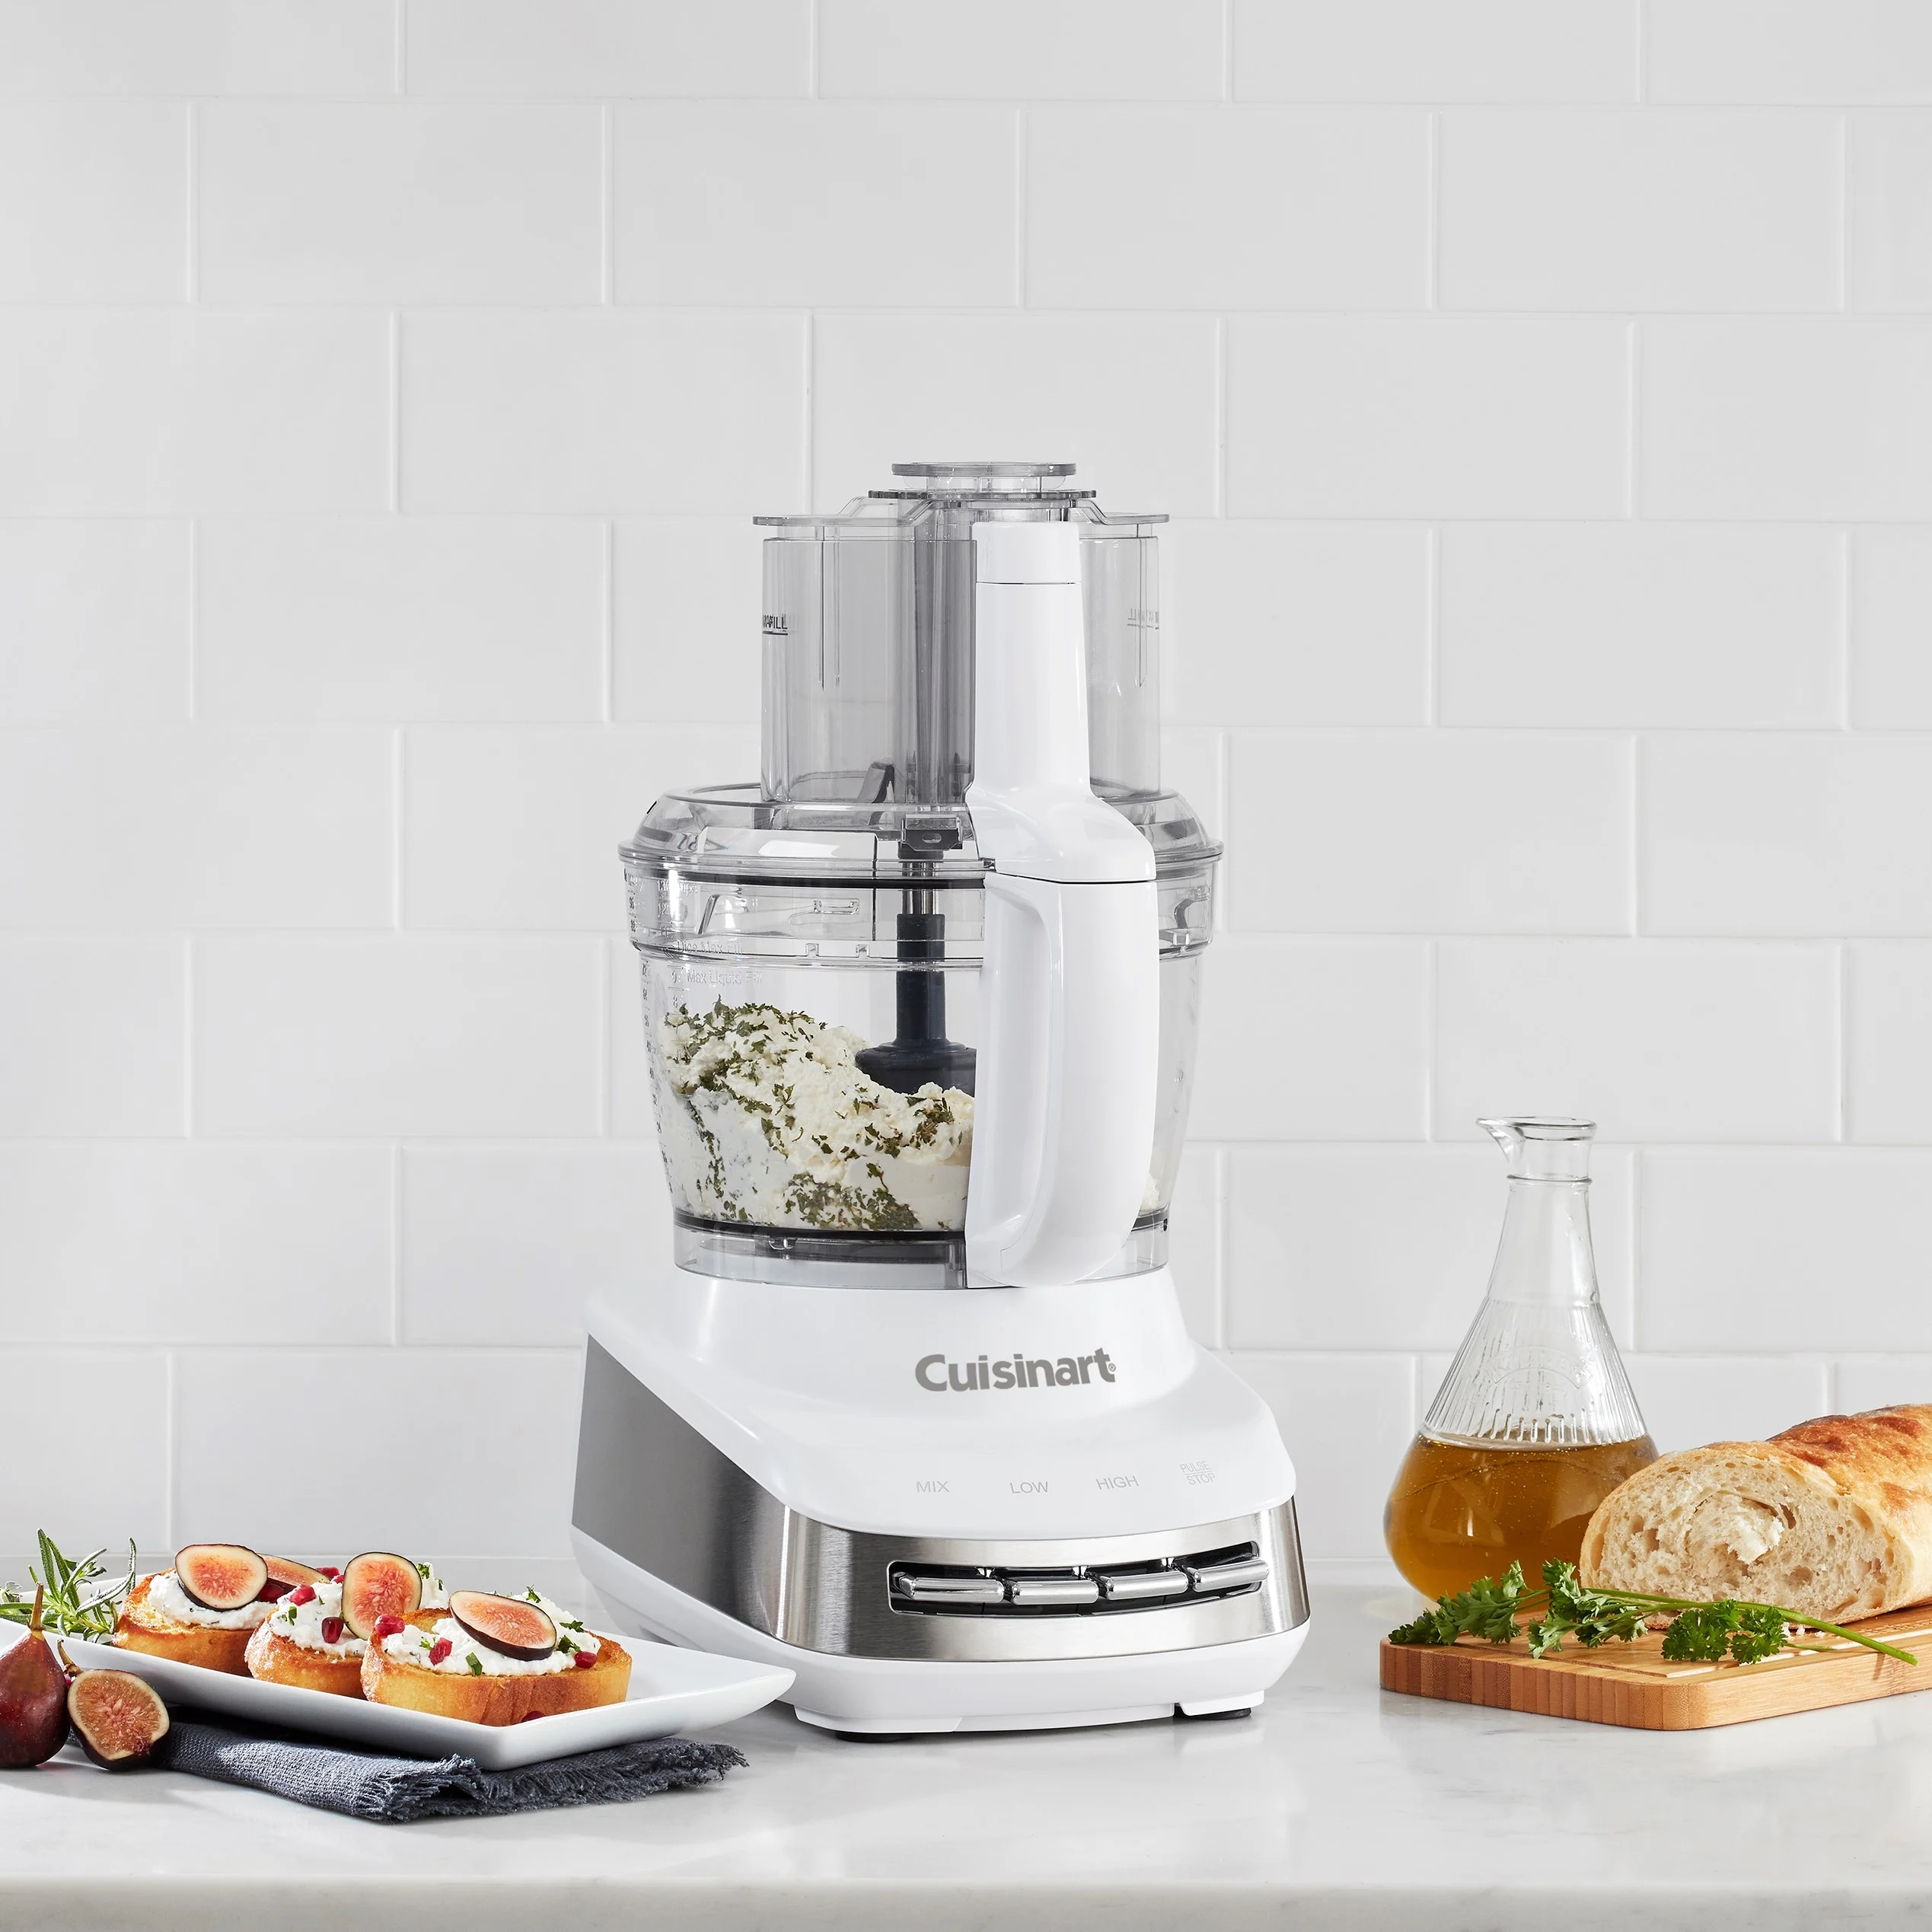 15 Amazing Cuisinart Food Processor Replacement Parts For 2023